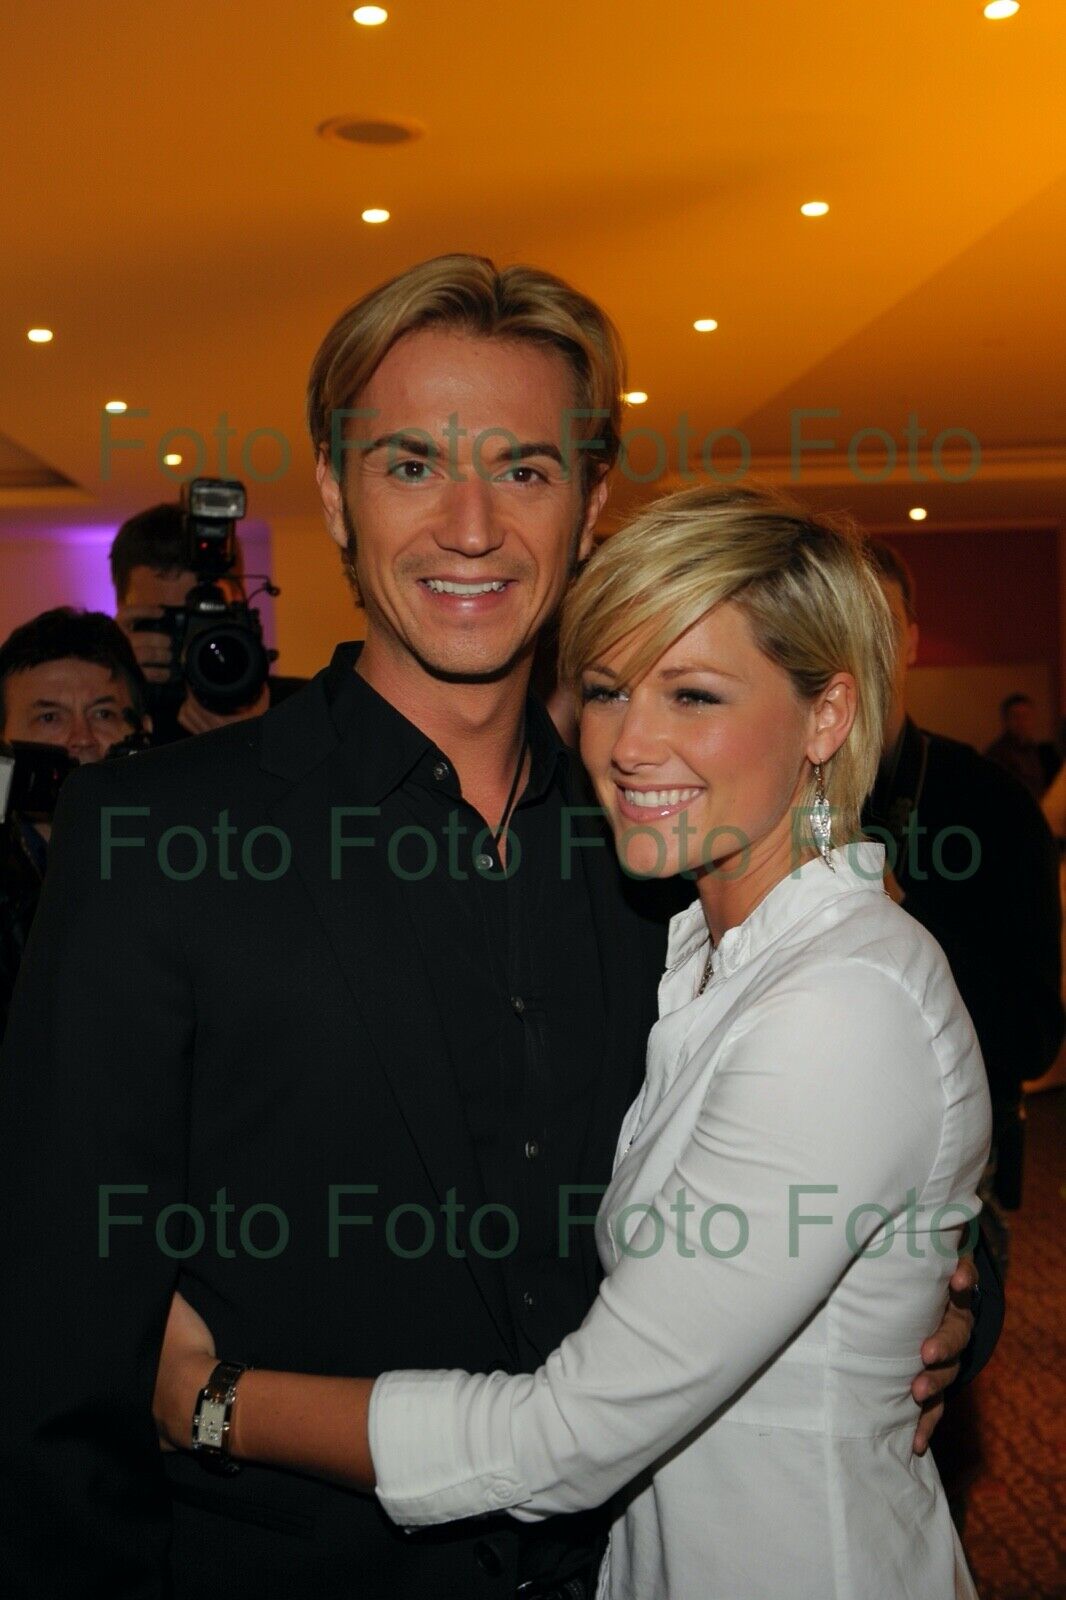 Helene Fischer - Florian Silbereisen Photo Poster painting 20 X 30 CM Without Autograph (Be-64